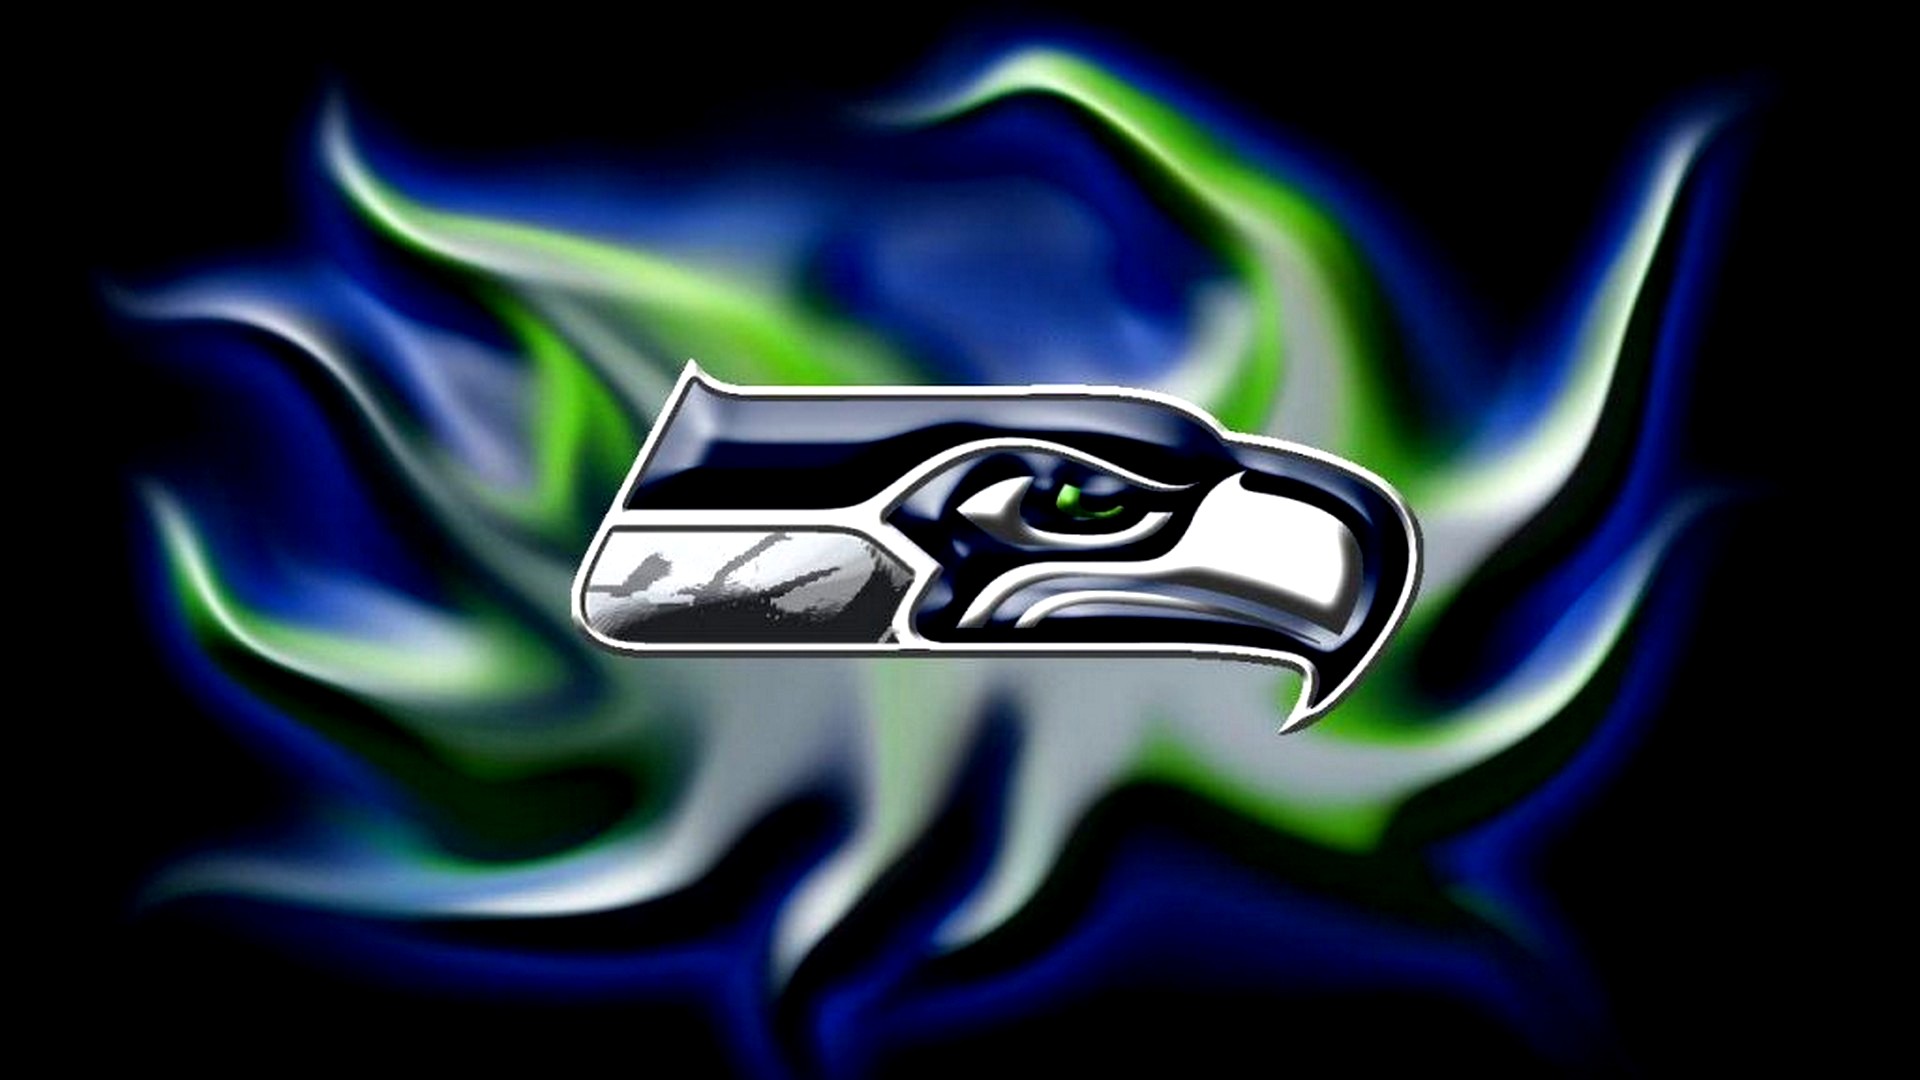 Seattle Seahawks Wallpaper for Computer with high-resolution 1920x1080 pixel. Download and set as wallpaper for Desktop Computer, Apple iPhone X, XS Max, XR, 8, 7, 6, SE, iPad, Android